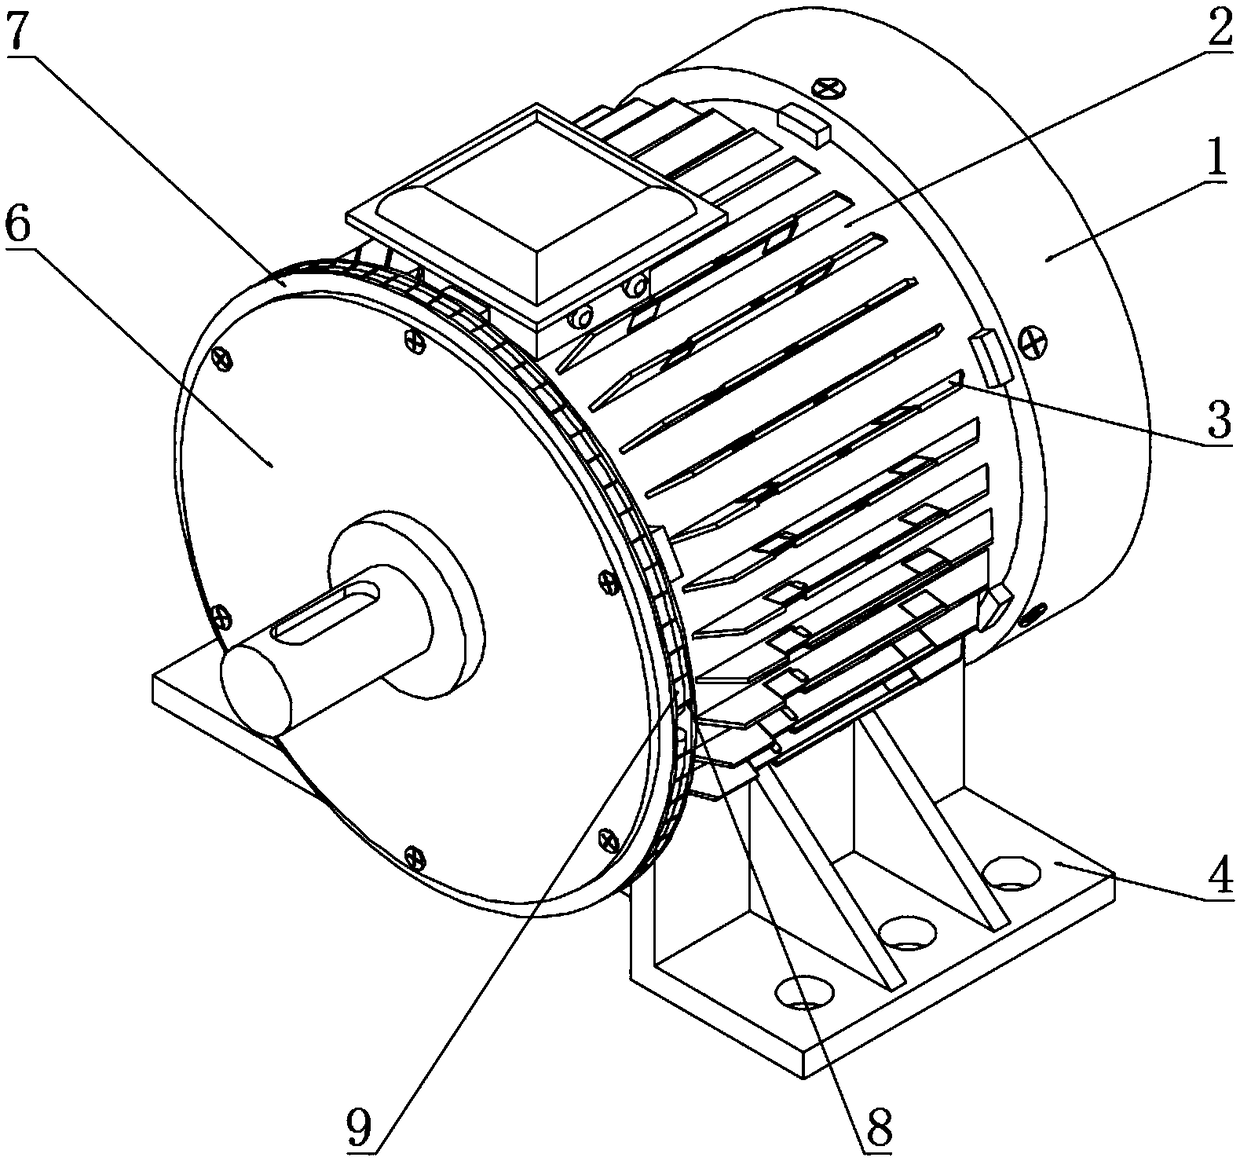 Motor with damping function